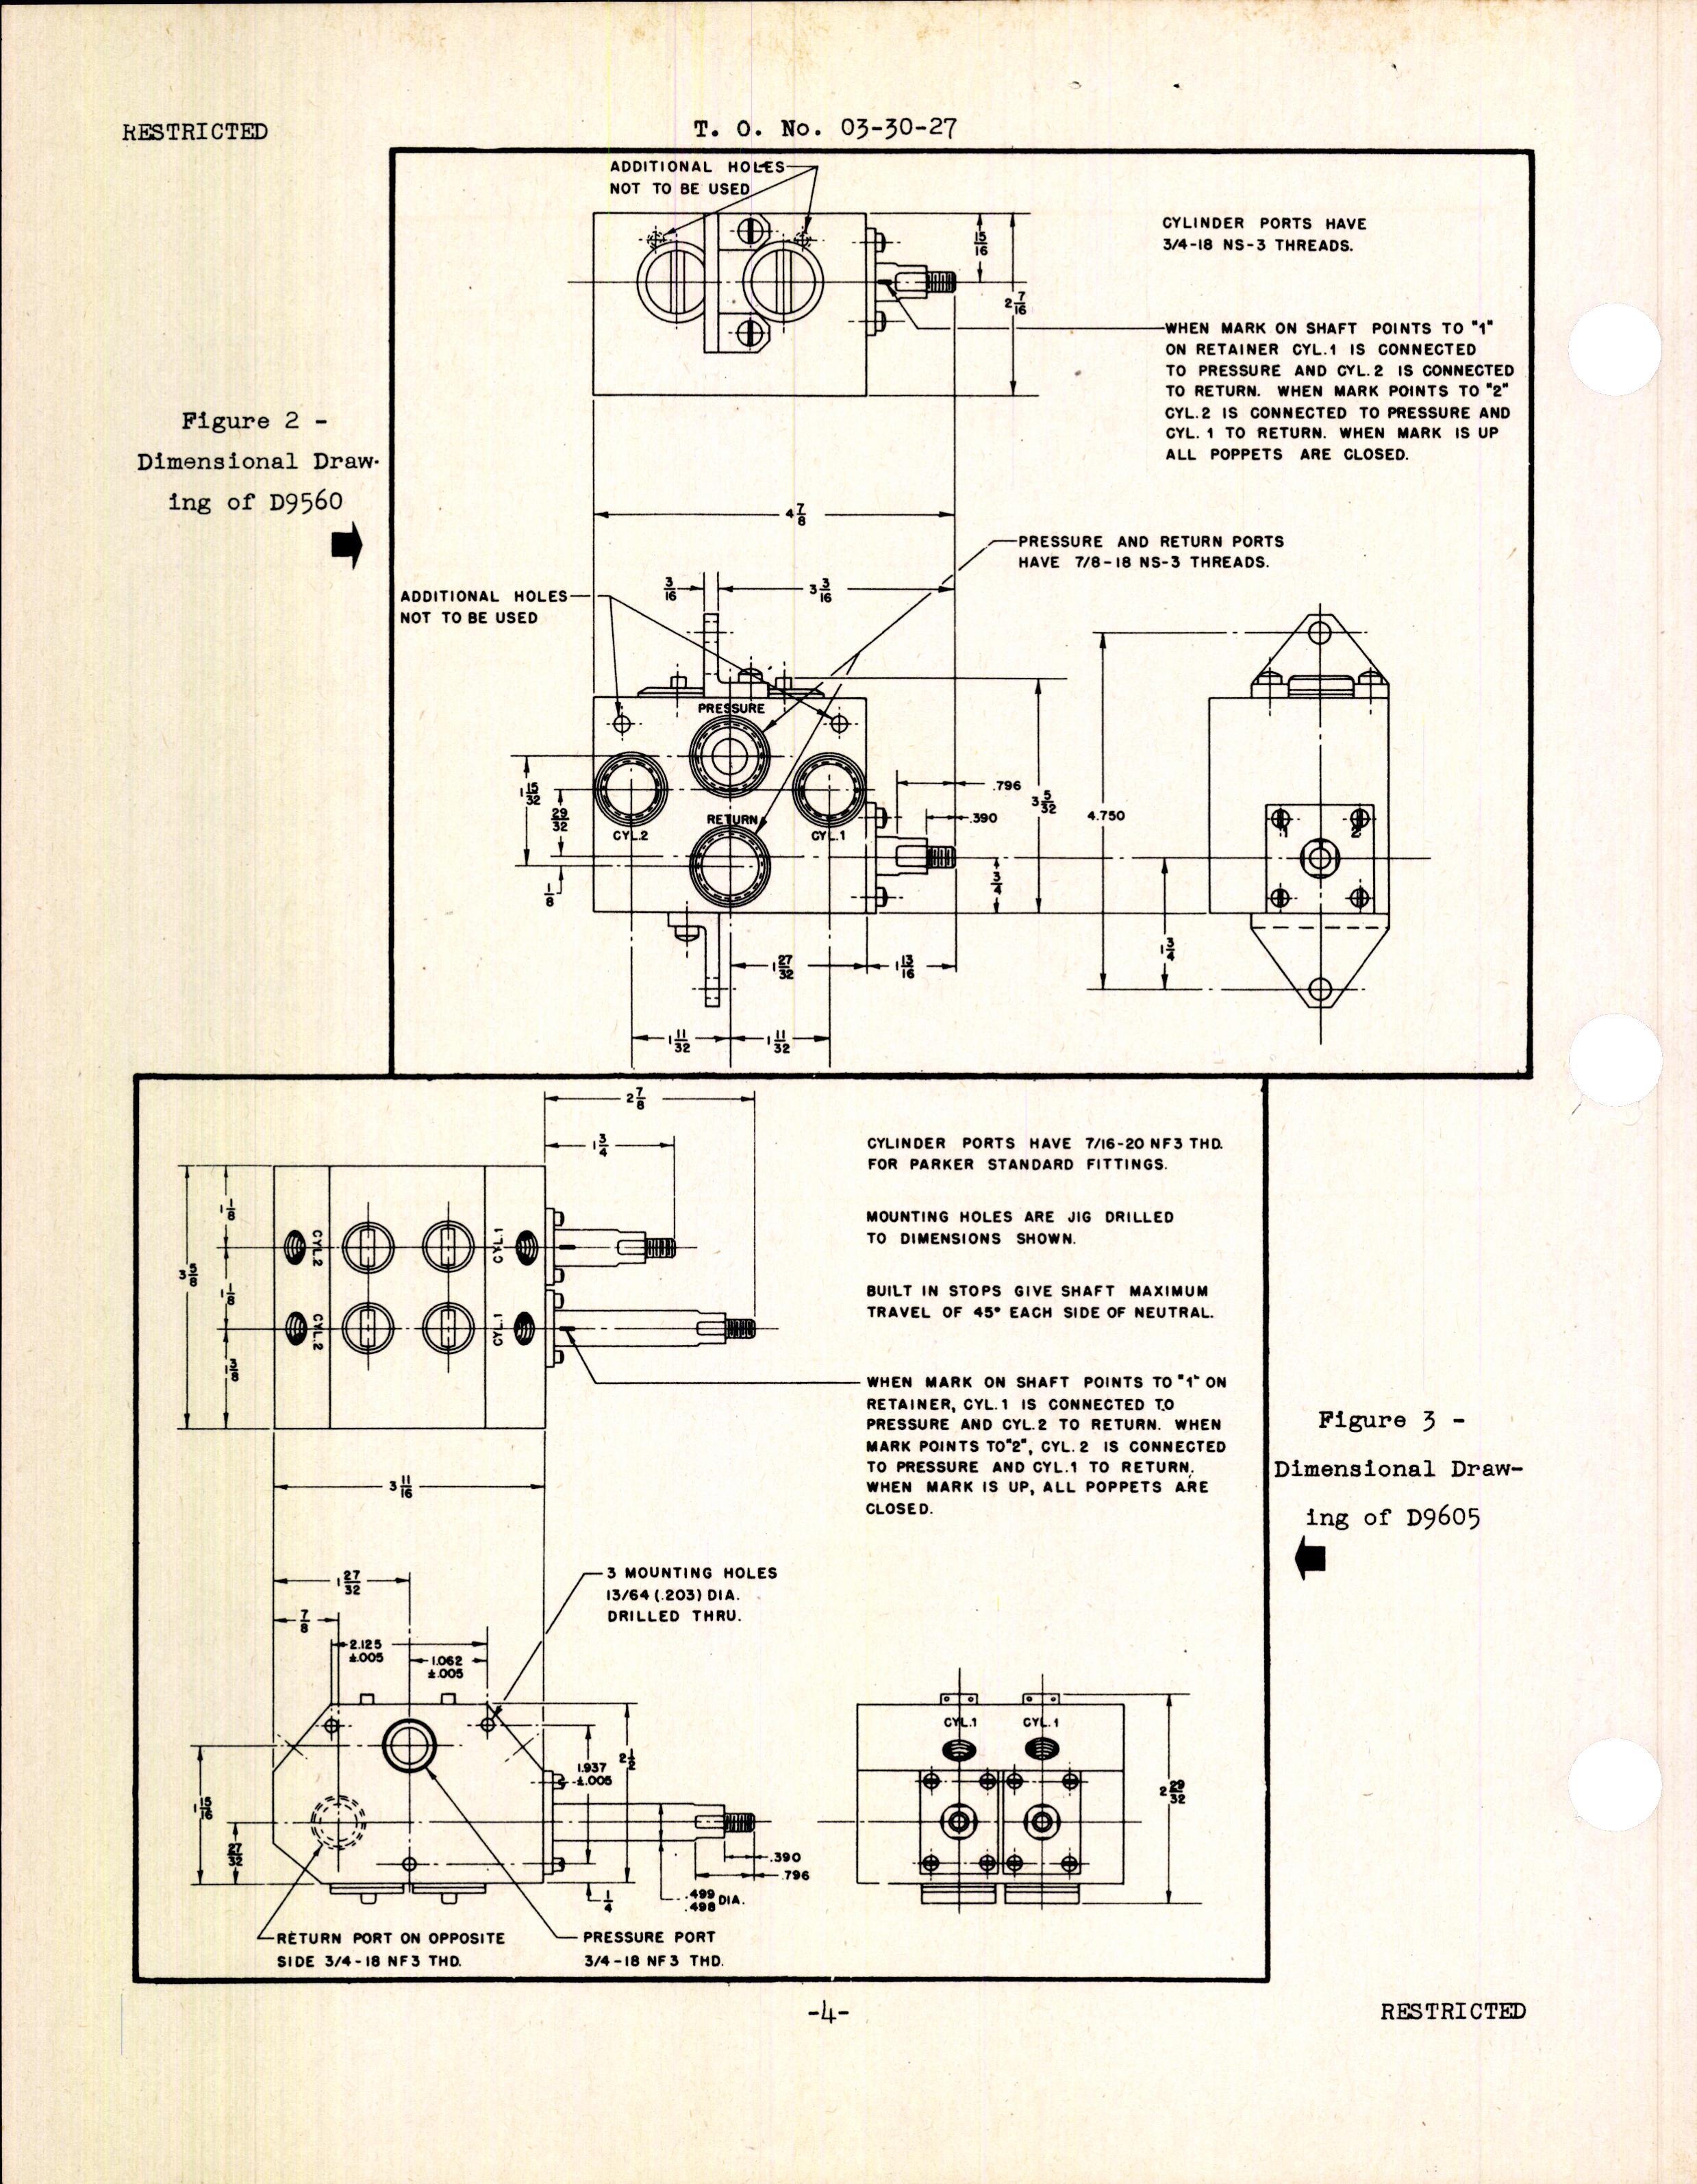 Sample page 6 from AirCorps Library document: Handbook of Instructions with Parts Catalog for Hydraulic Selector Valves